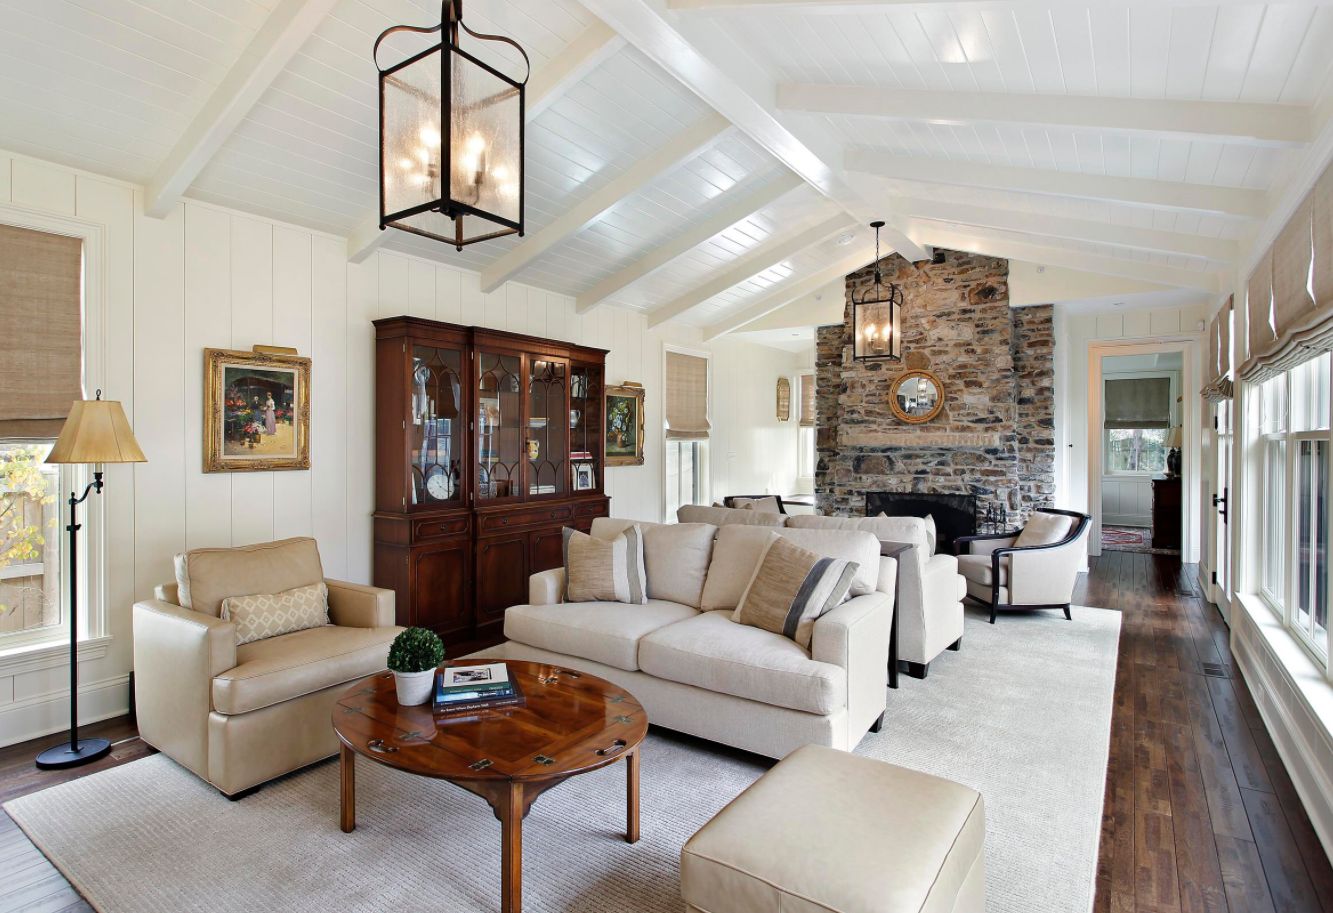 Vaulted Ceiling Ideas: 11 Dramatic Design Ideas For Your Ceiling